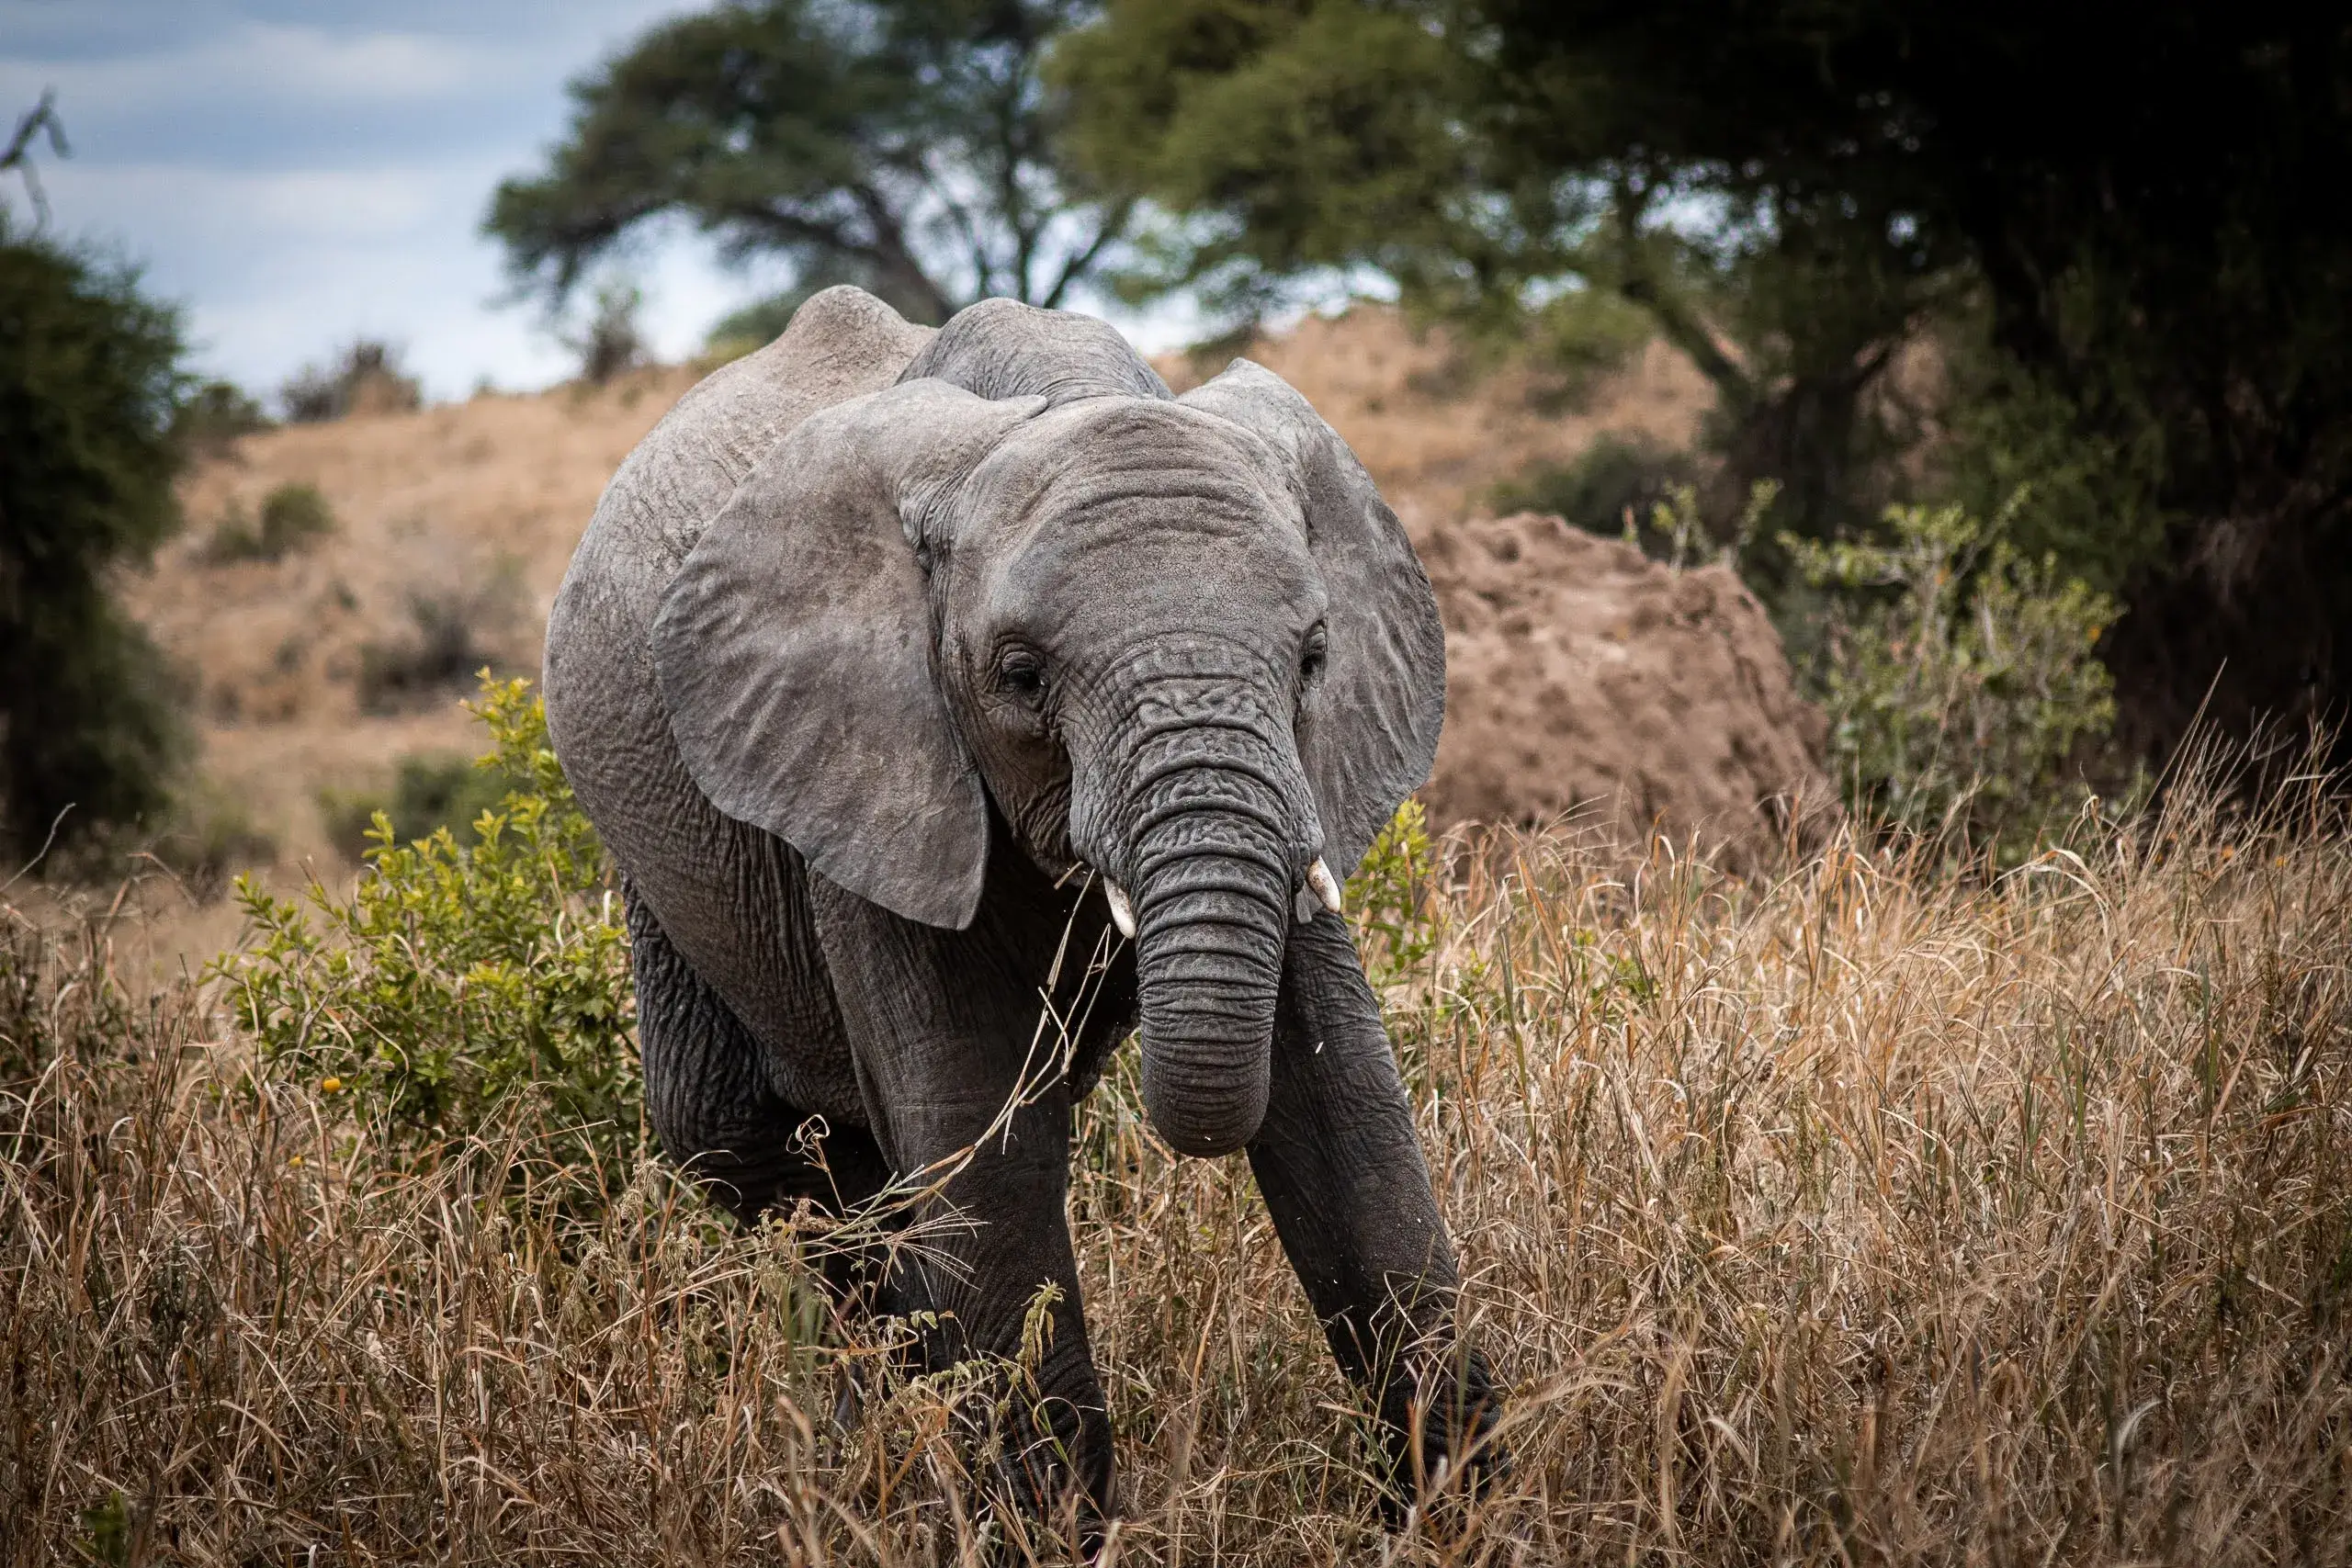 Baby elephant playing spotted in Mt Kilimanjaro